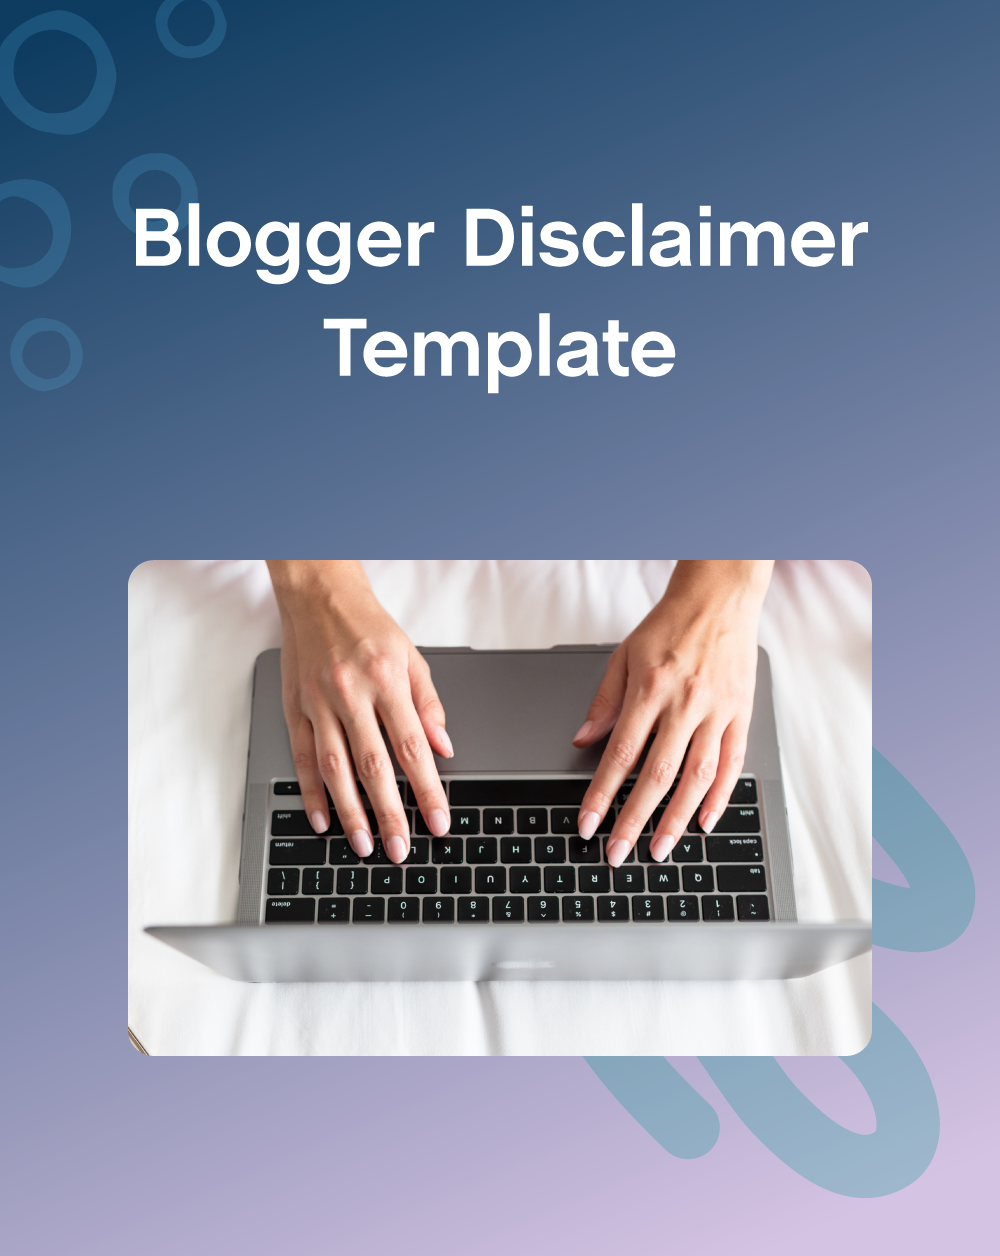 Blogger Disclaimer Template - The Contract Shop®